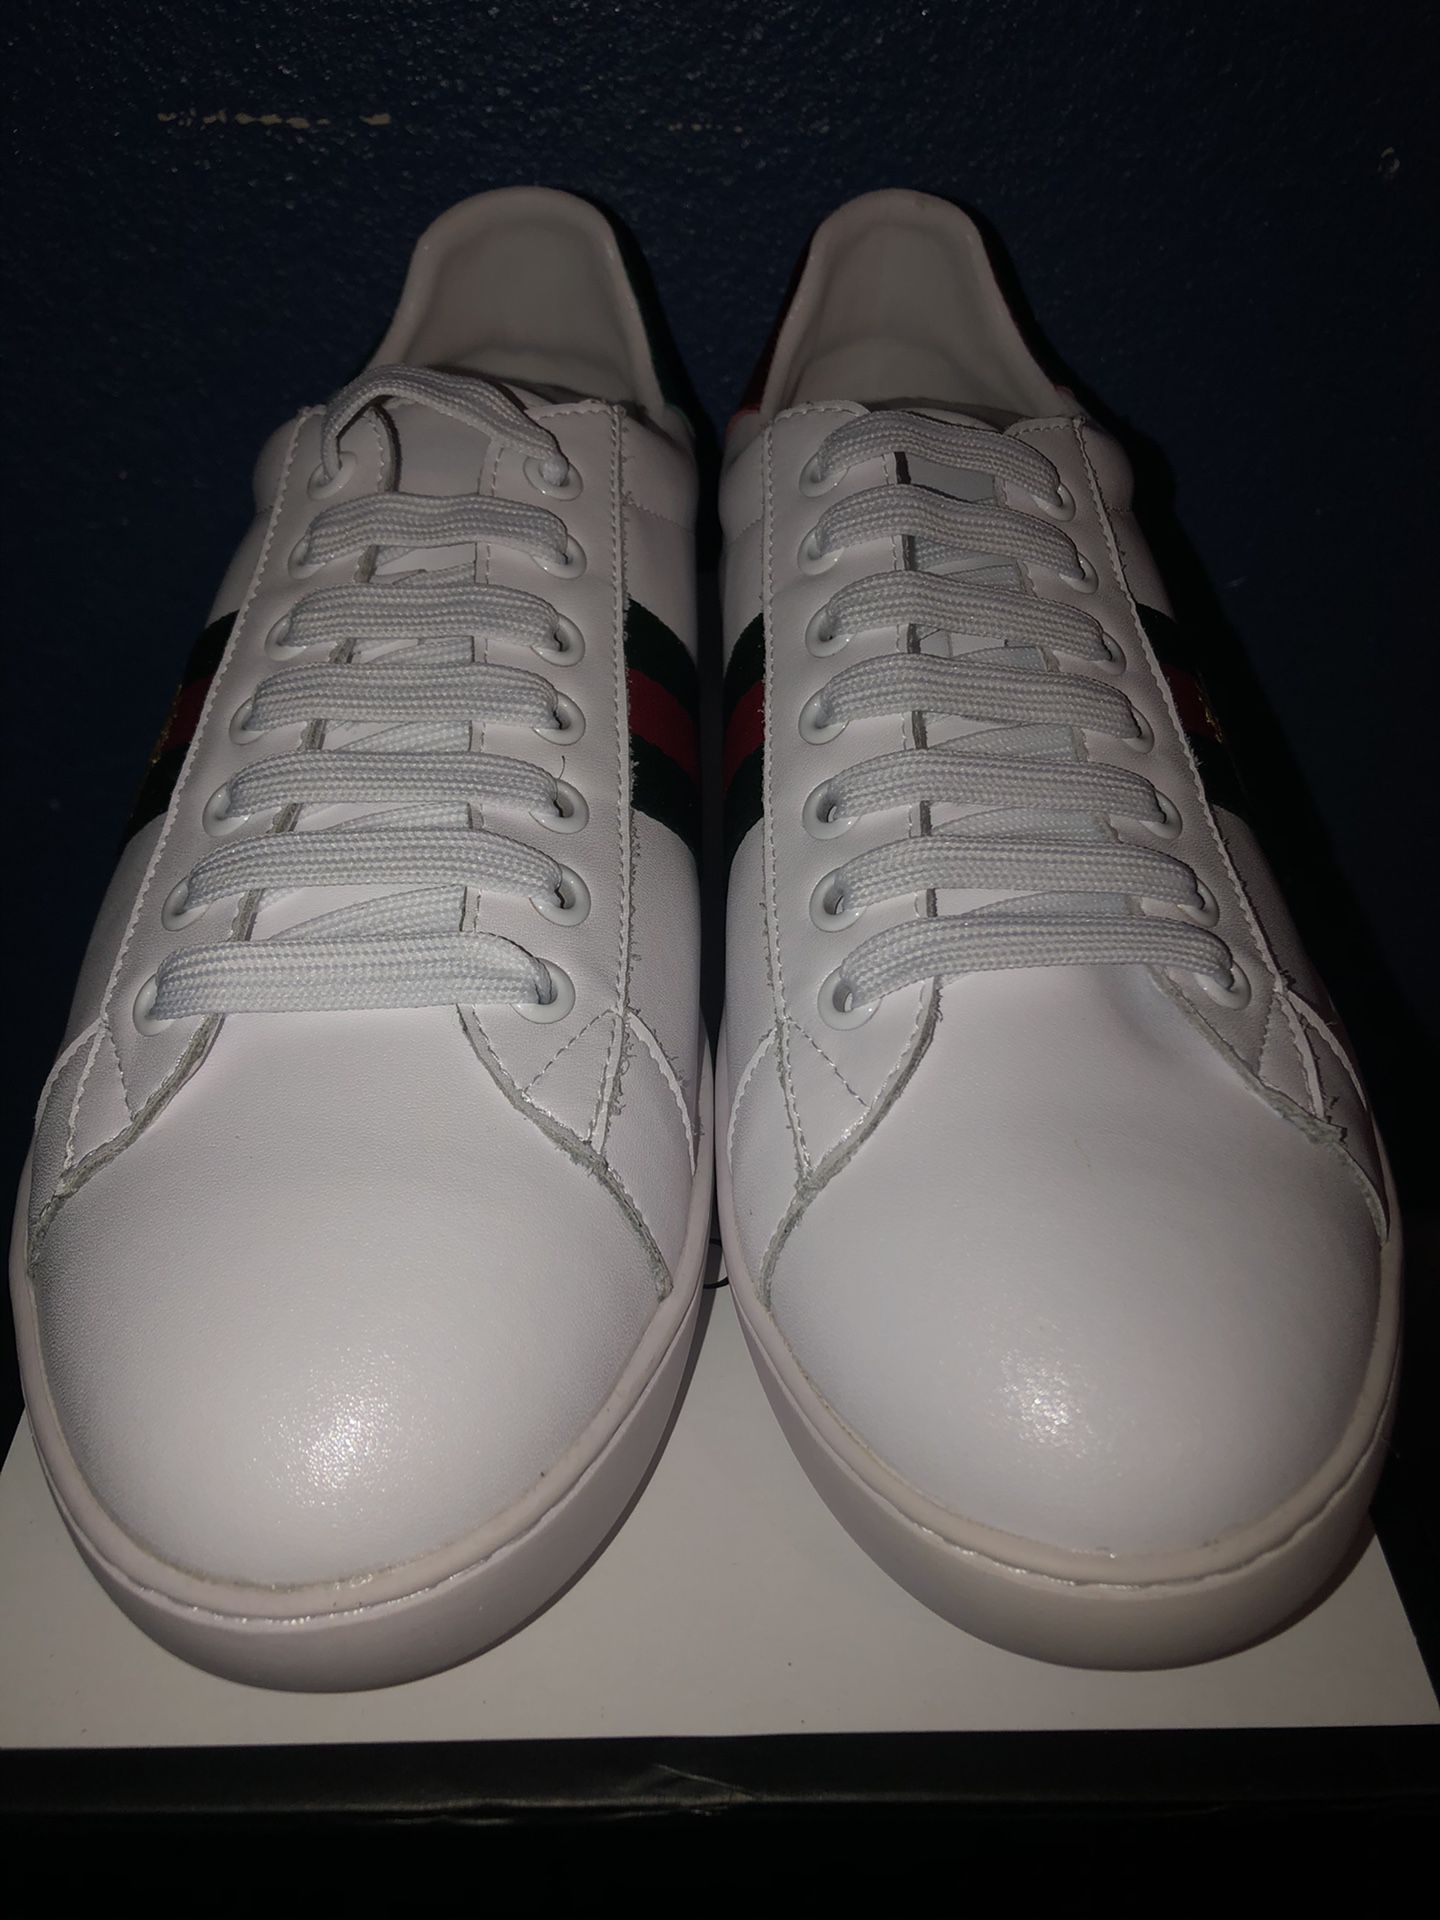 Men’s and women’s white Gucci shoes (read listing)